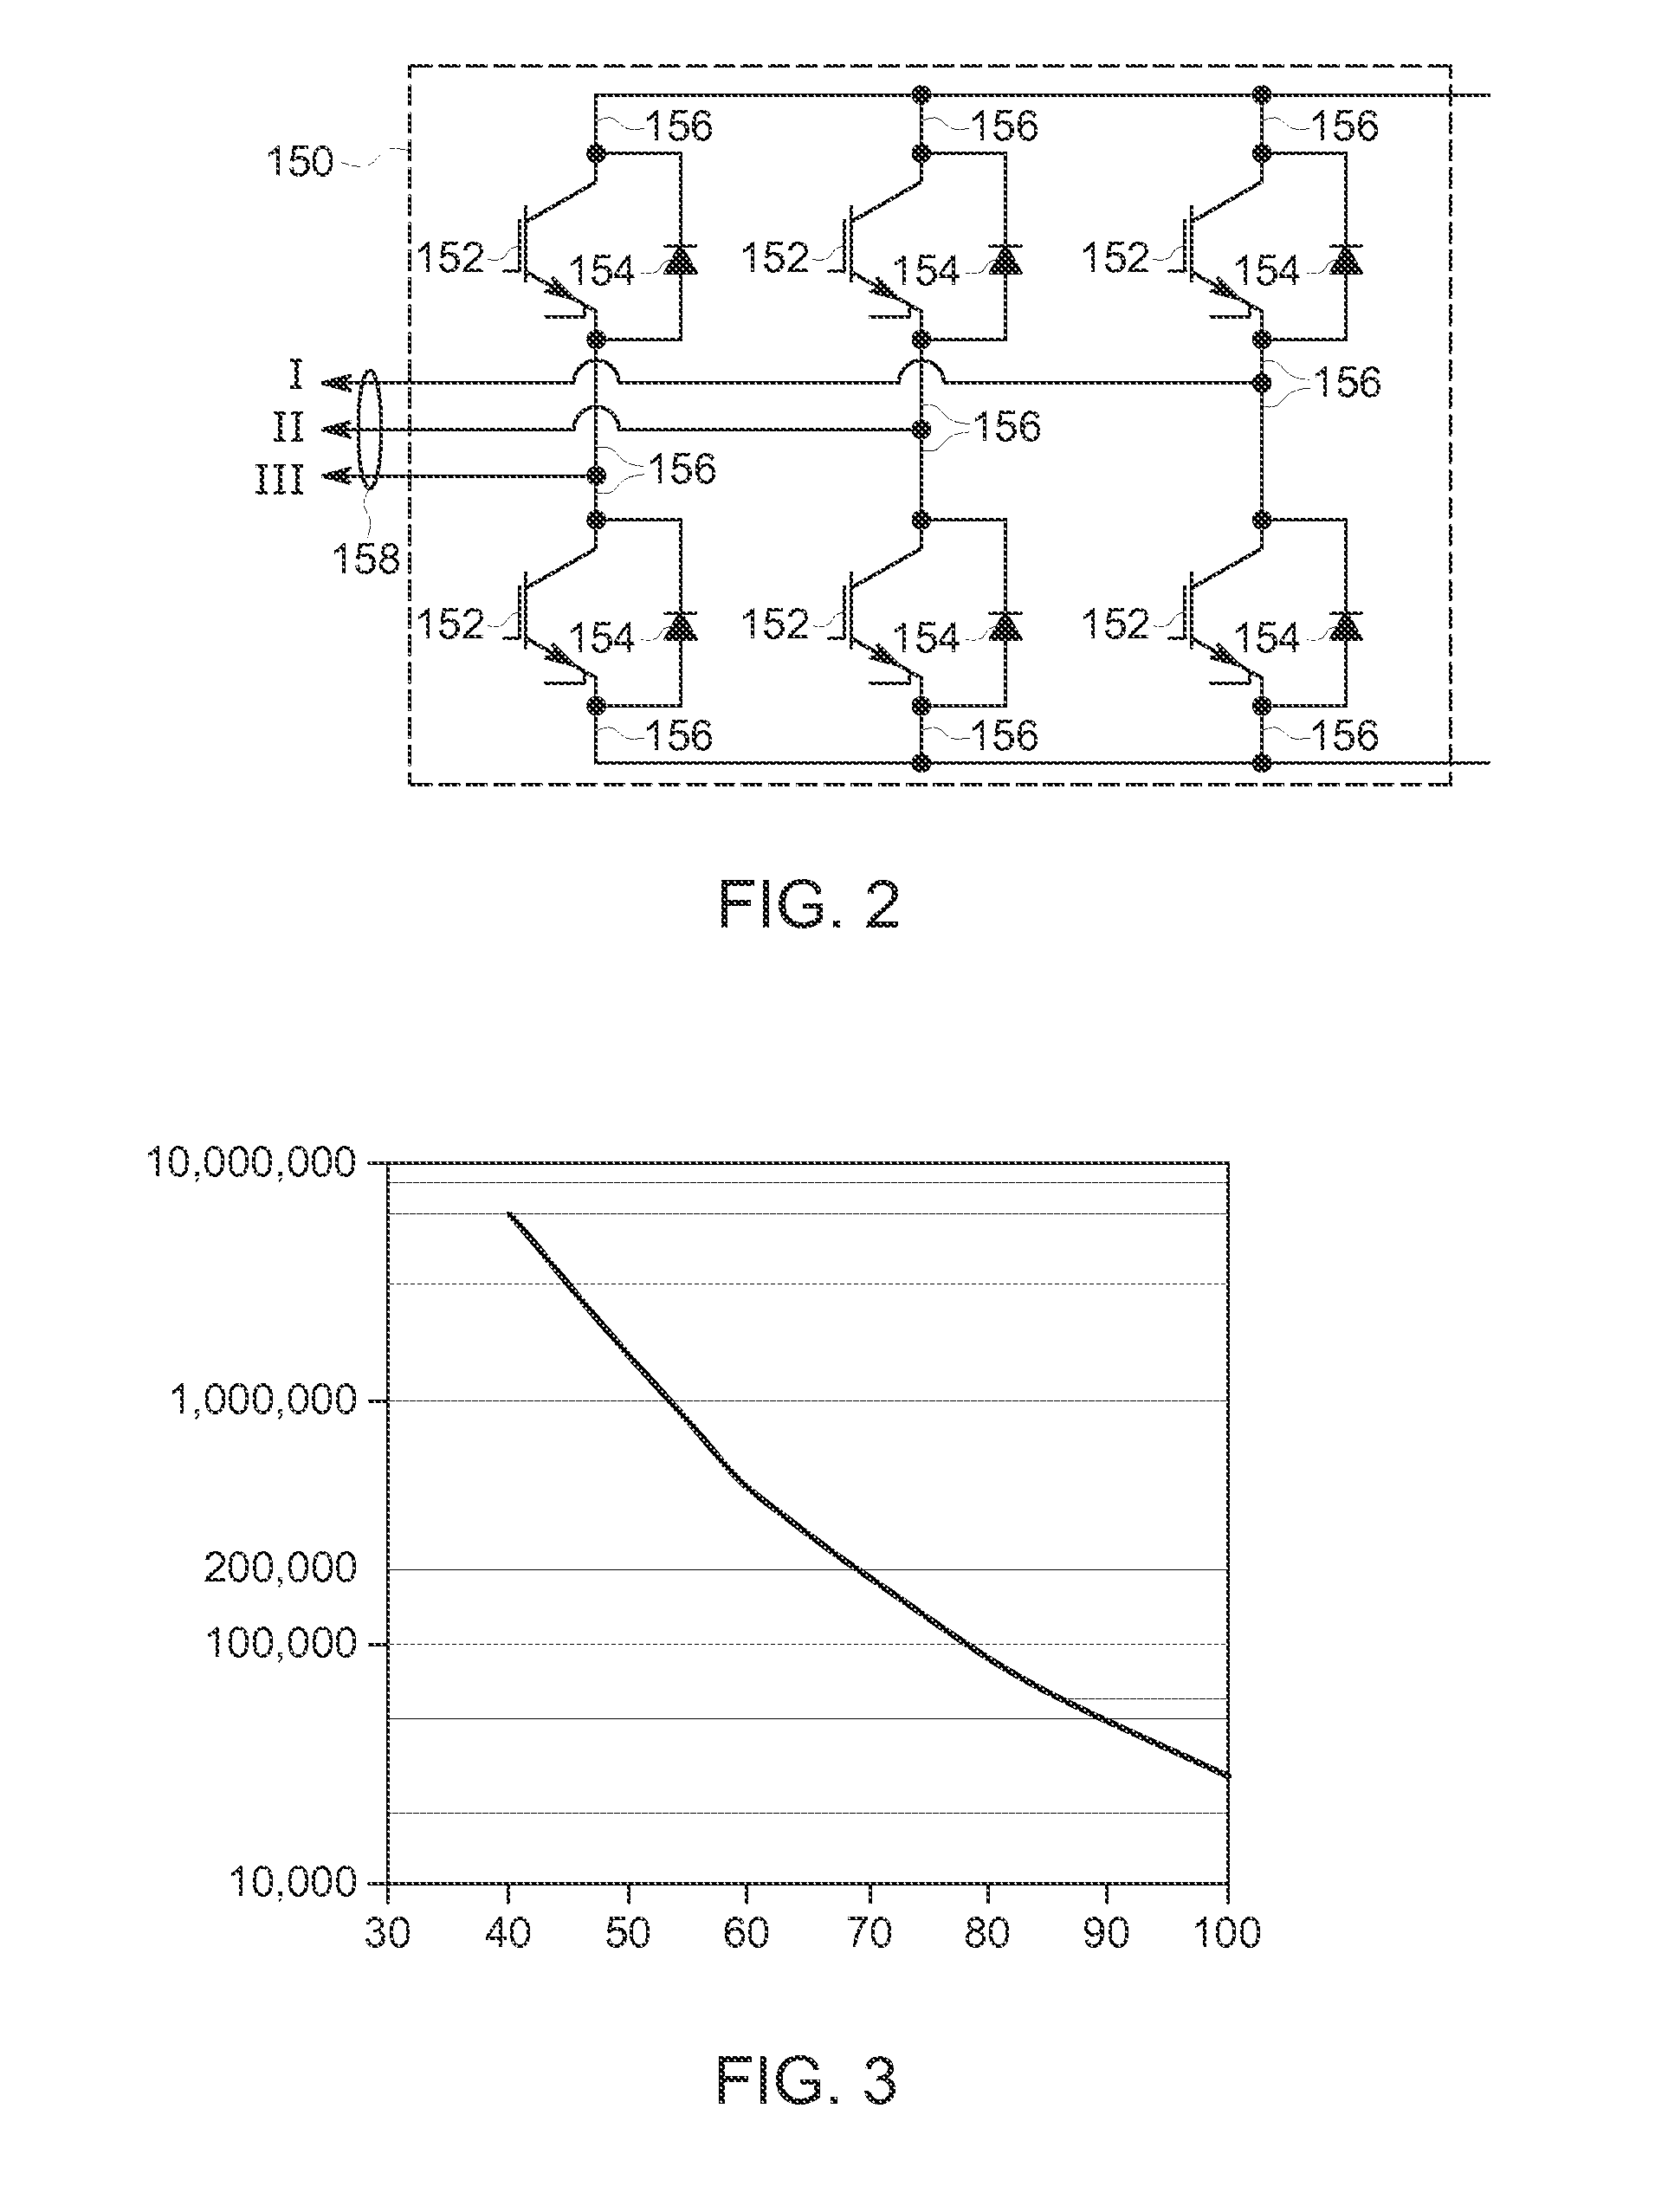 Life of a semiconductor by reducing temperature changes therein via reactive power